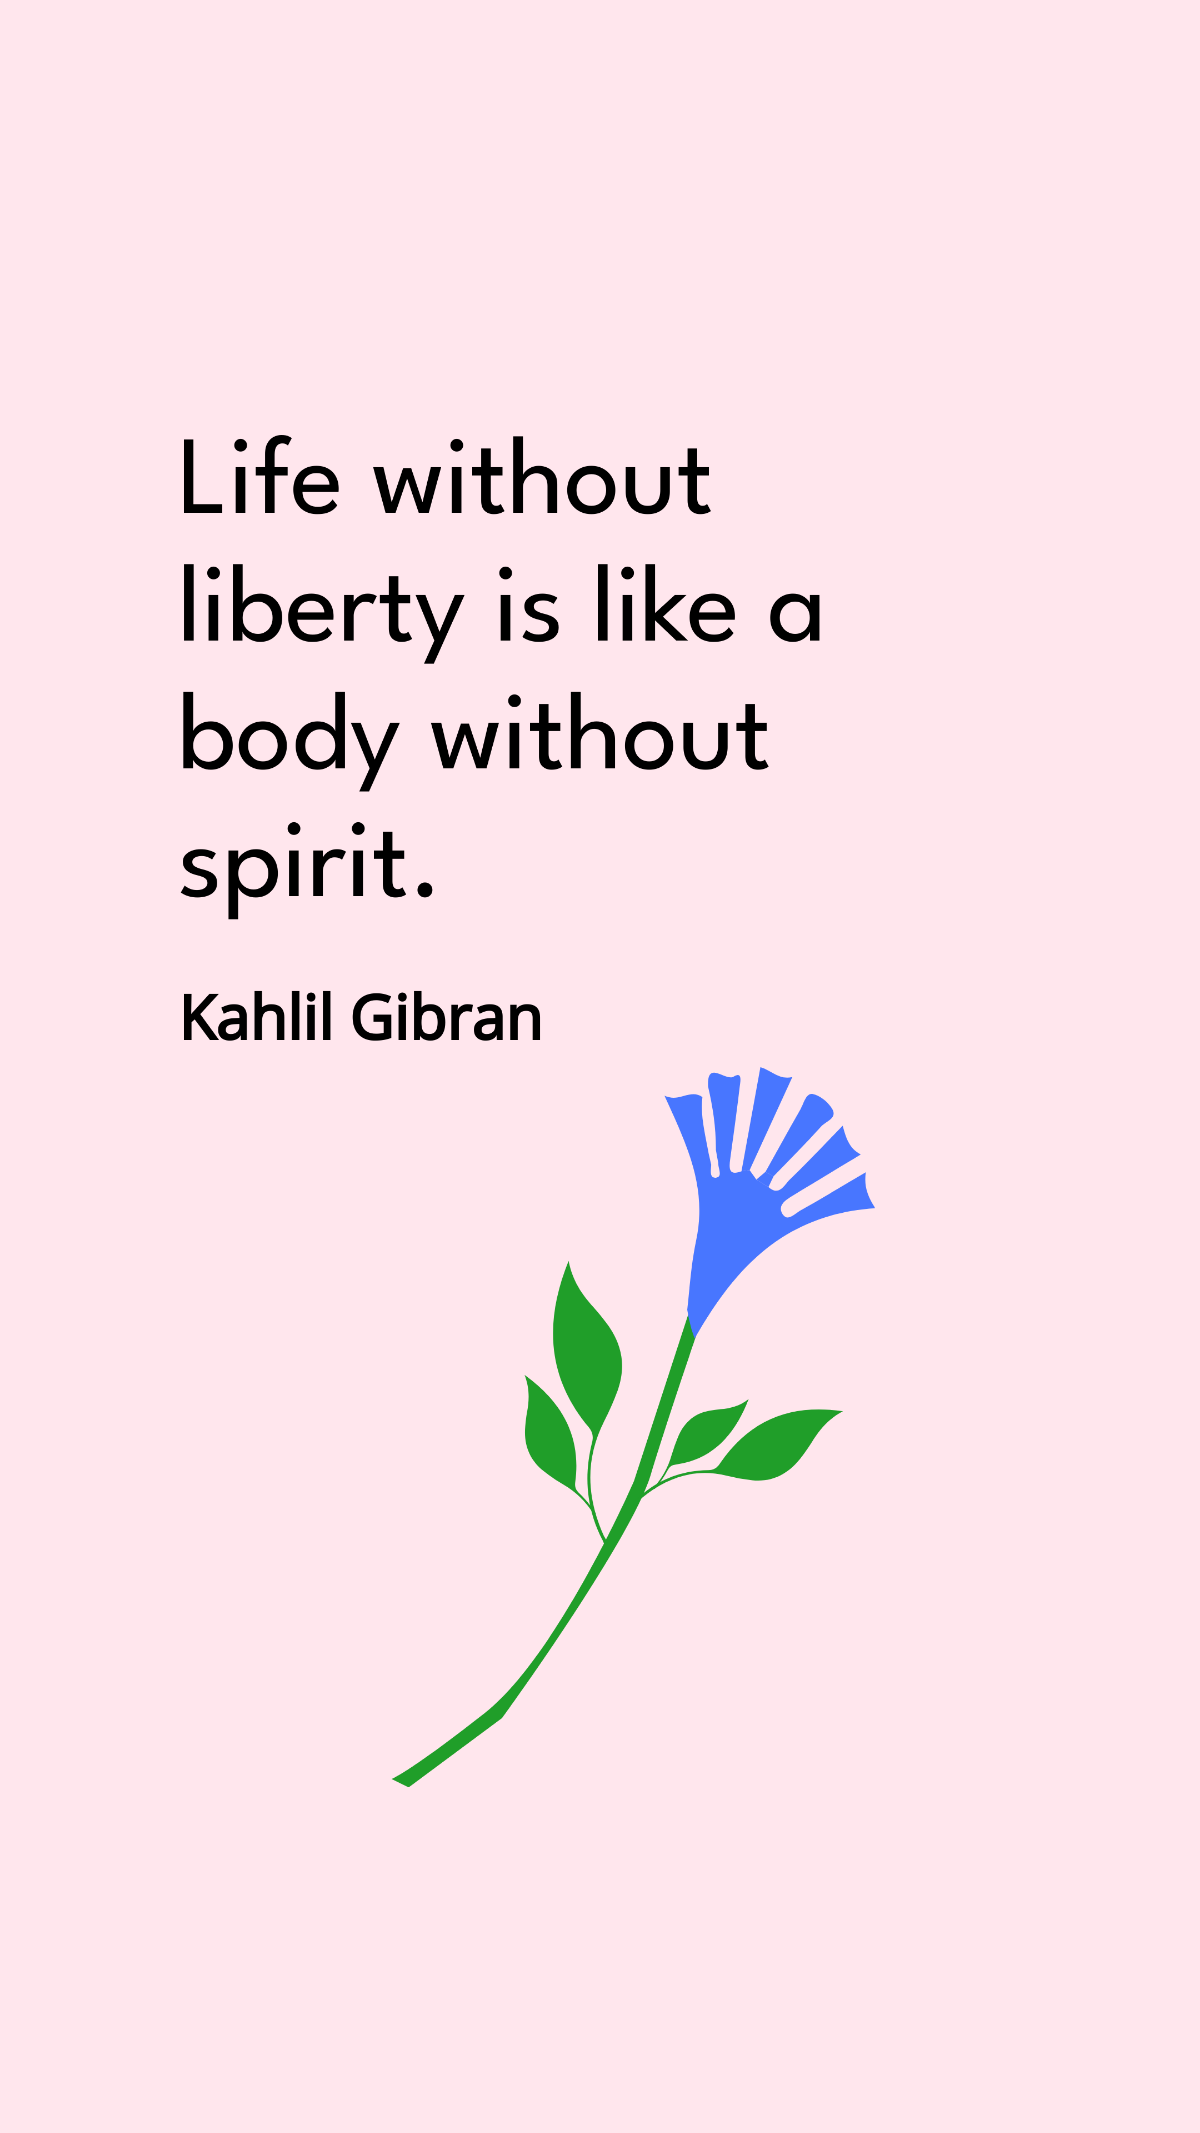 Kahlil Gibran - Life without liberty is like a body without spirit.